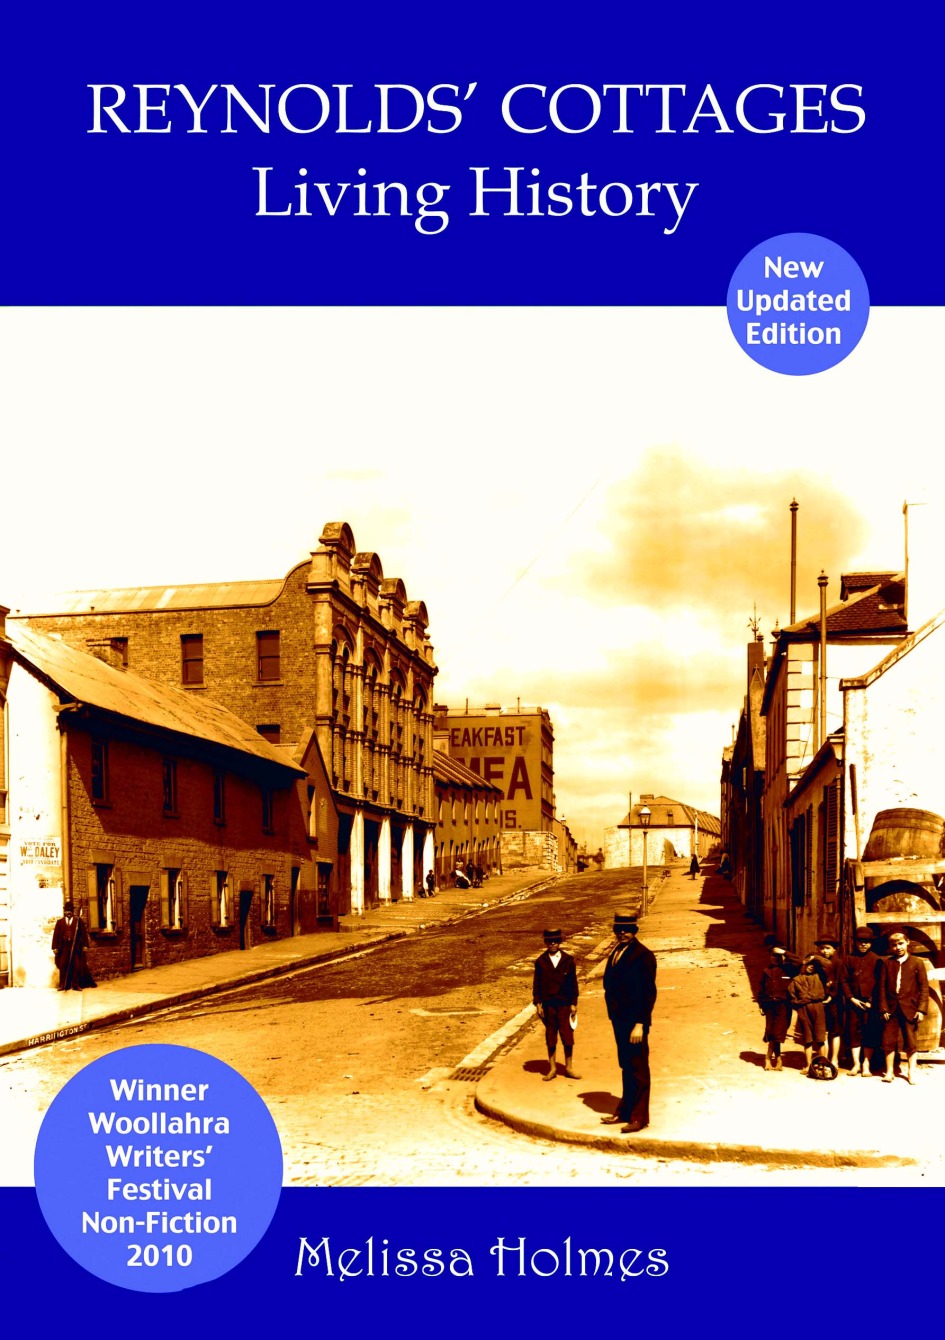 Reynolds' Cottages: Living History by Melissa Holmes